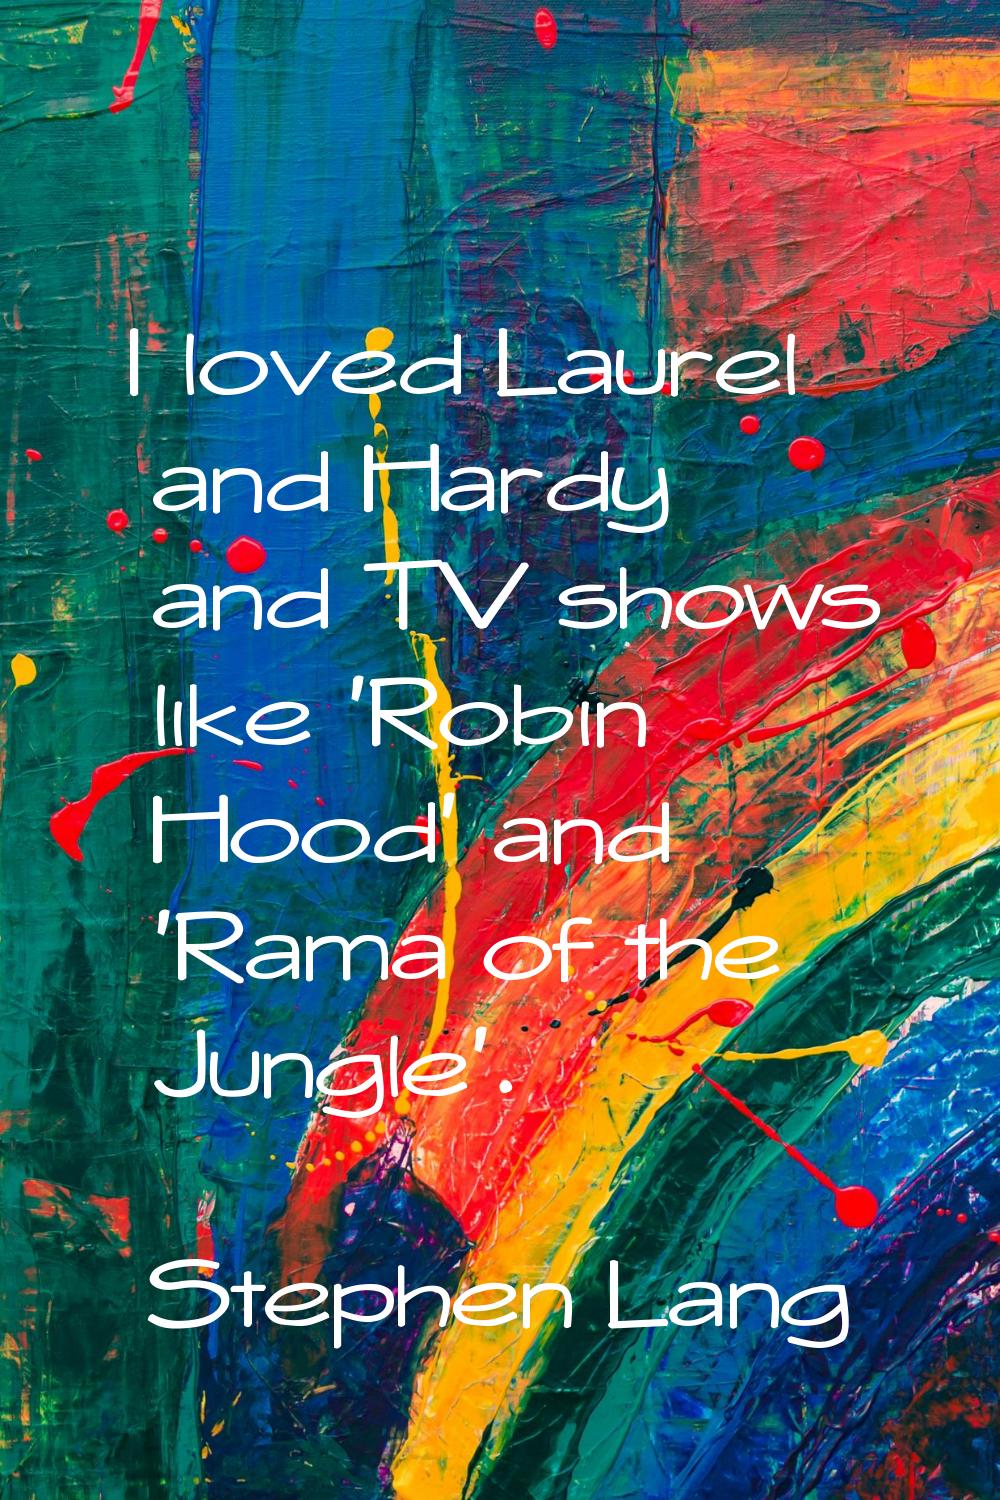 I loved Laurel and Hardy and TV shows like 'Robin Hood' and 'Rama of the Jungle'.